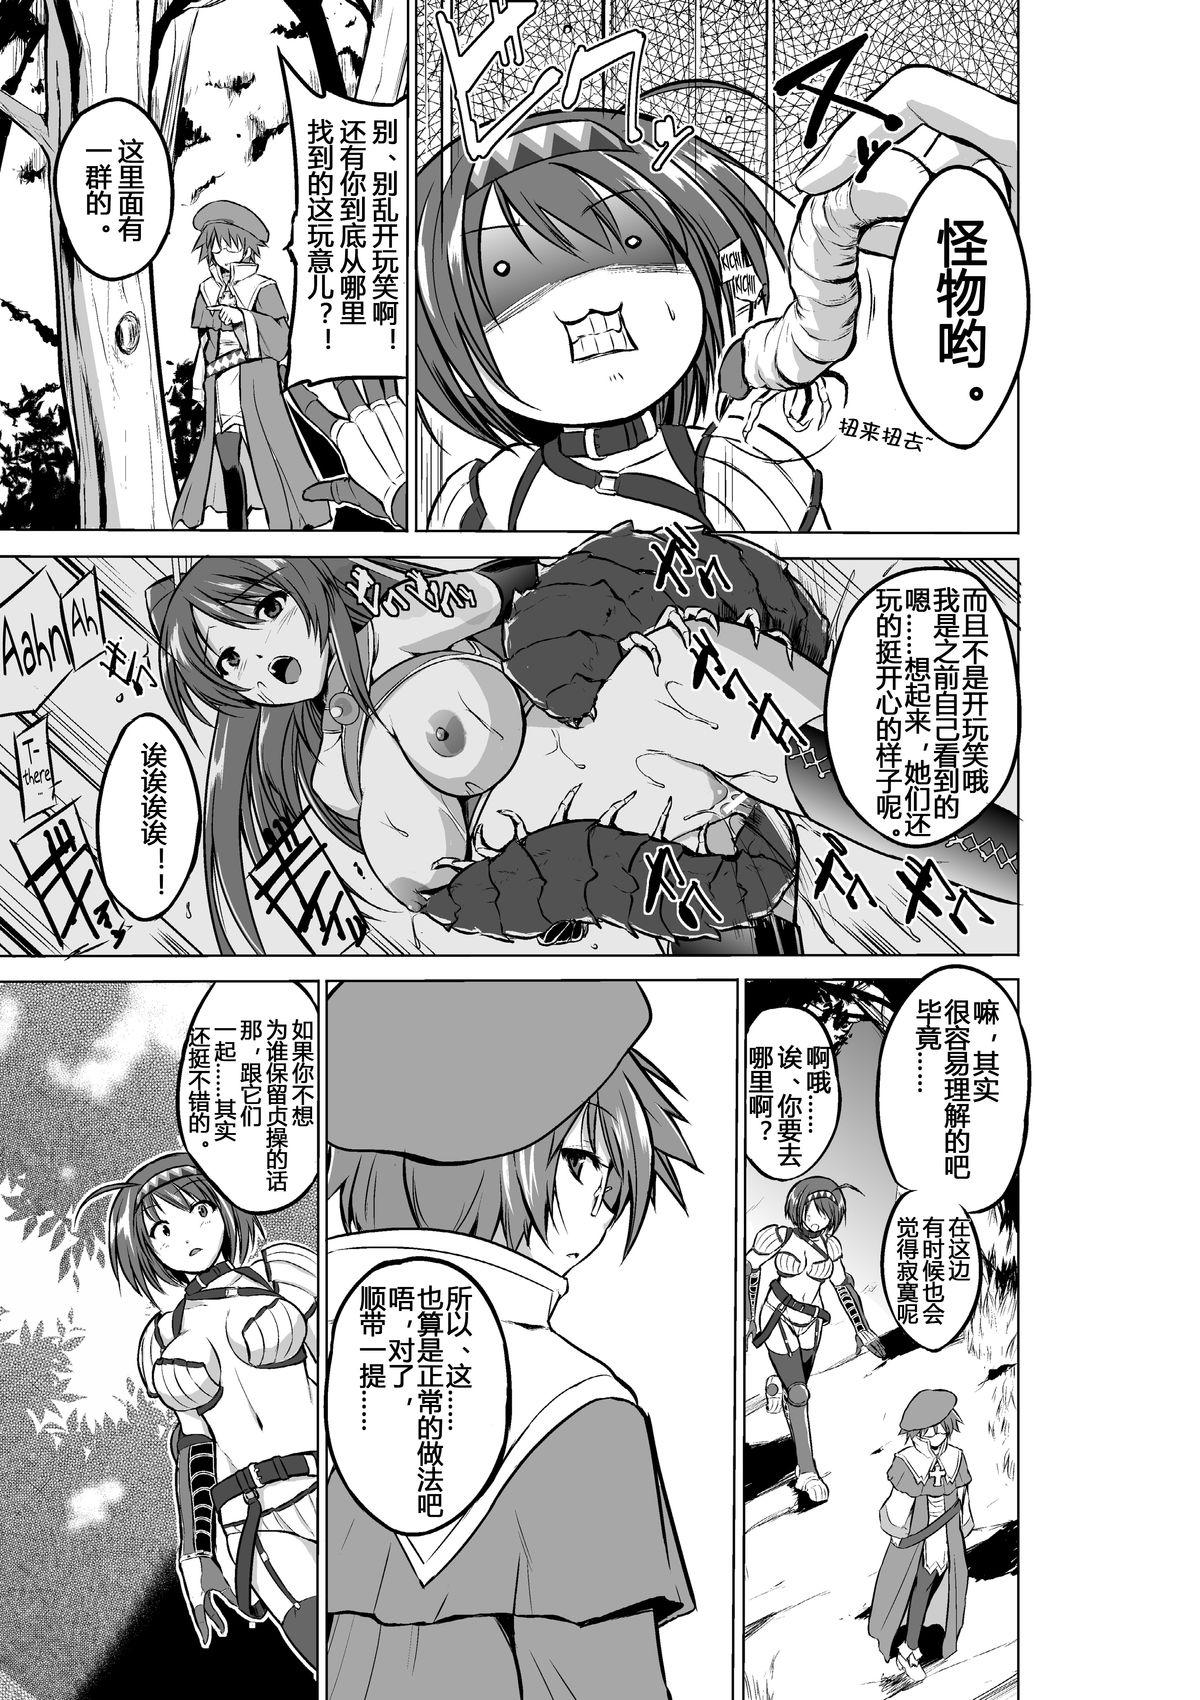 Casting Dungeon Travelers - Chie no Himegoto - Toheart2 Amateur - Page 5